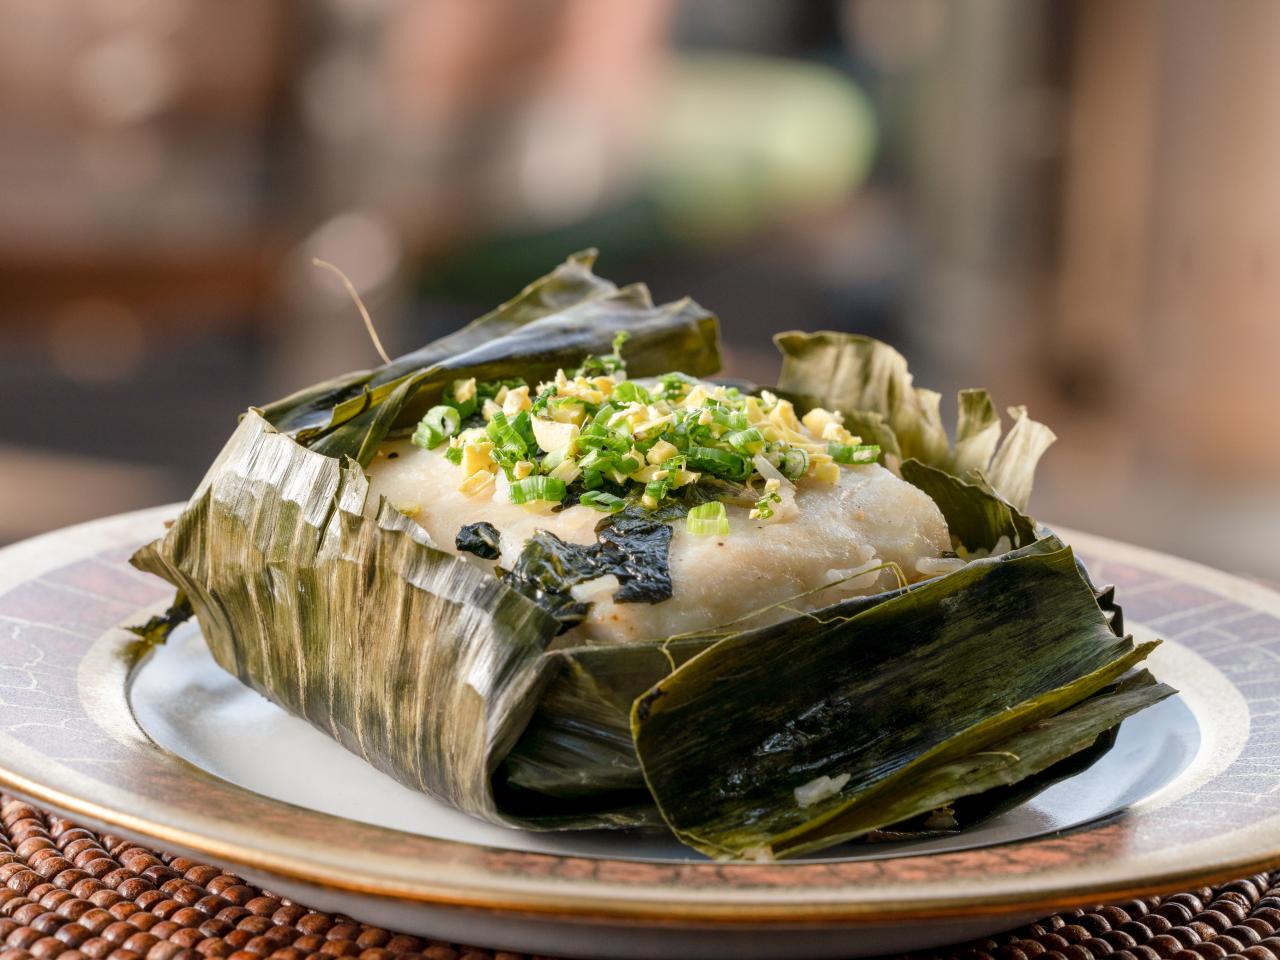 https://food.fnr.sndimg.com/content/dam/images/food/fullset/2020/12/29/0/YK0402_Banana-Leaf-Wrapped-Bass-with-Scallion-Ginger-Fried-Rice_s4x3.jpg.rend.hgtvcom.1280.960.suffix/1609274180438.jpeg